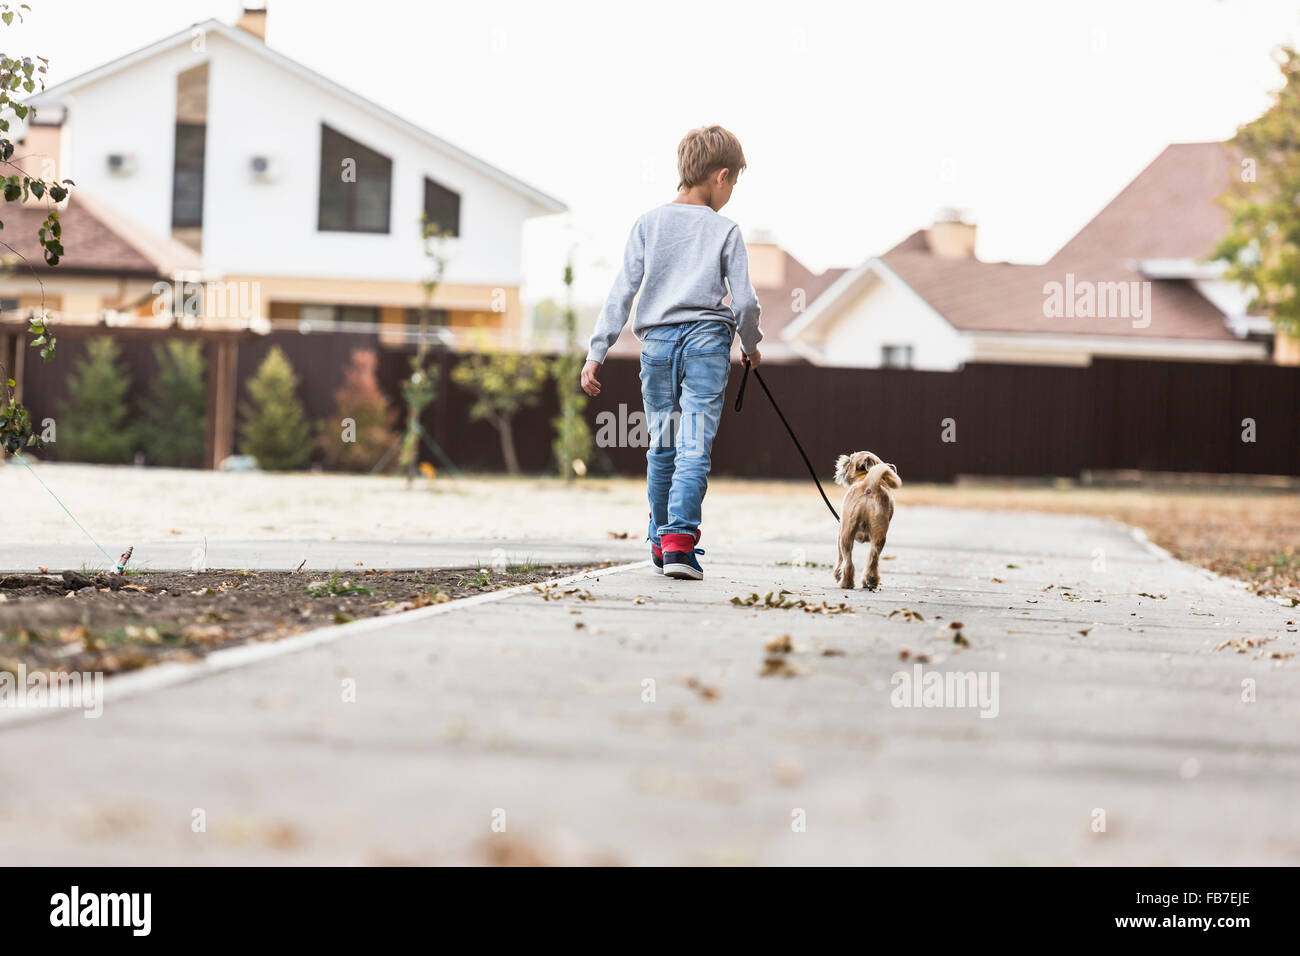 Rear view of boy walking with dog on footpath Stock Photo